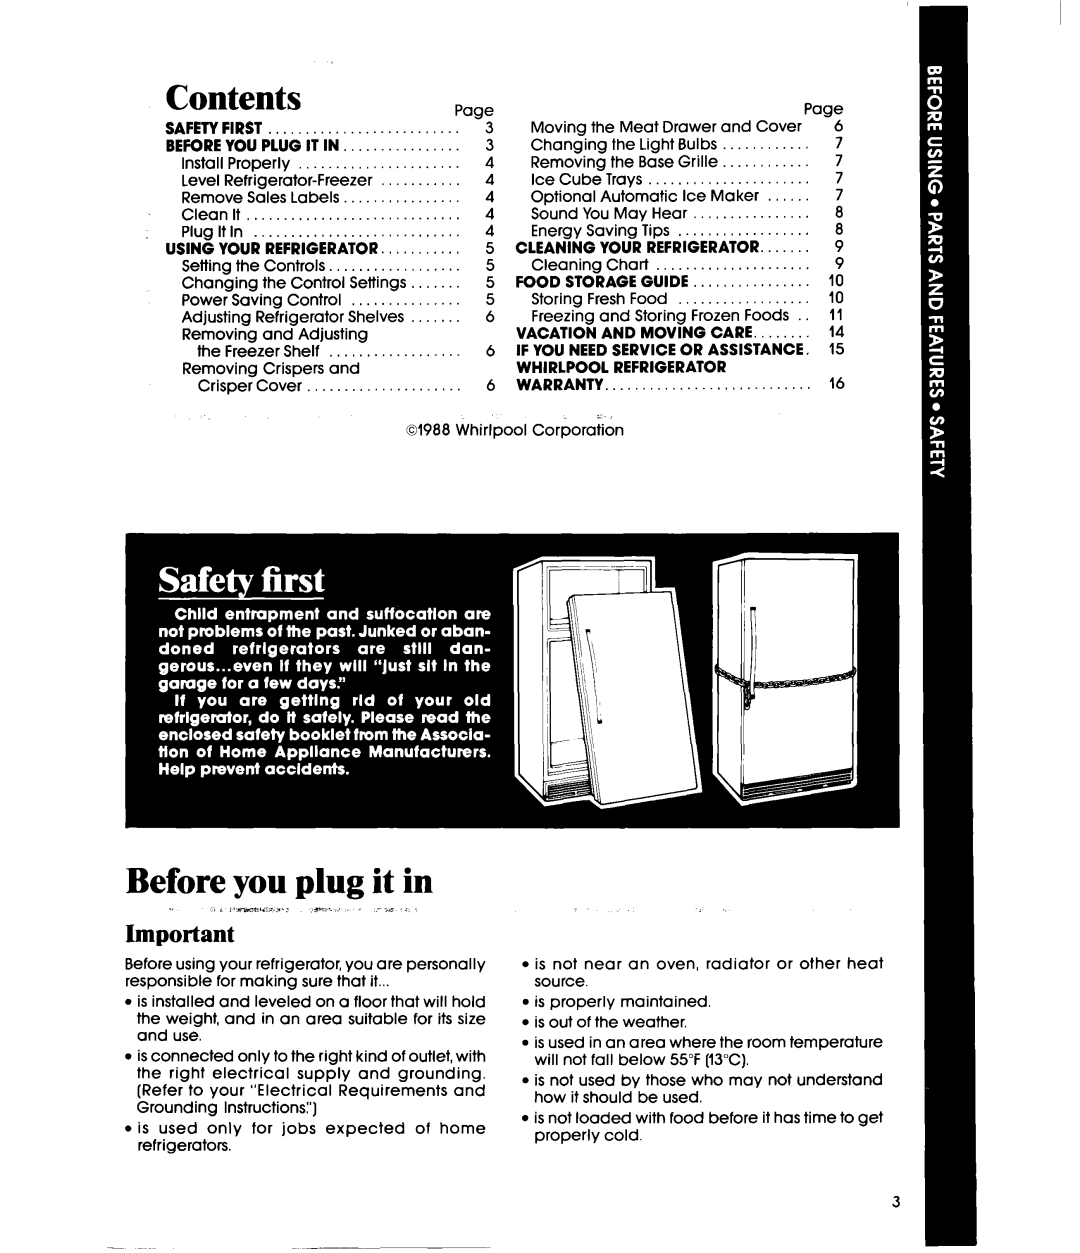 Whirlpool ET20GM manual Contents, Before you plug it in 